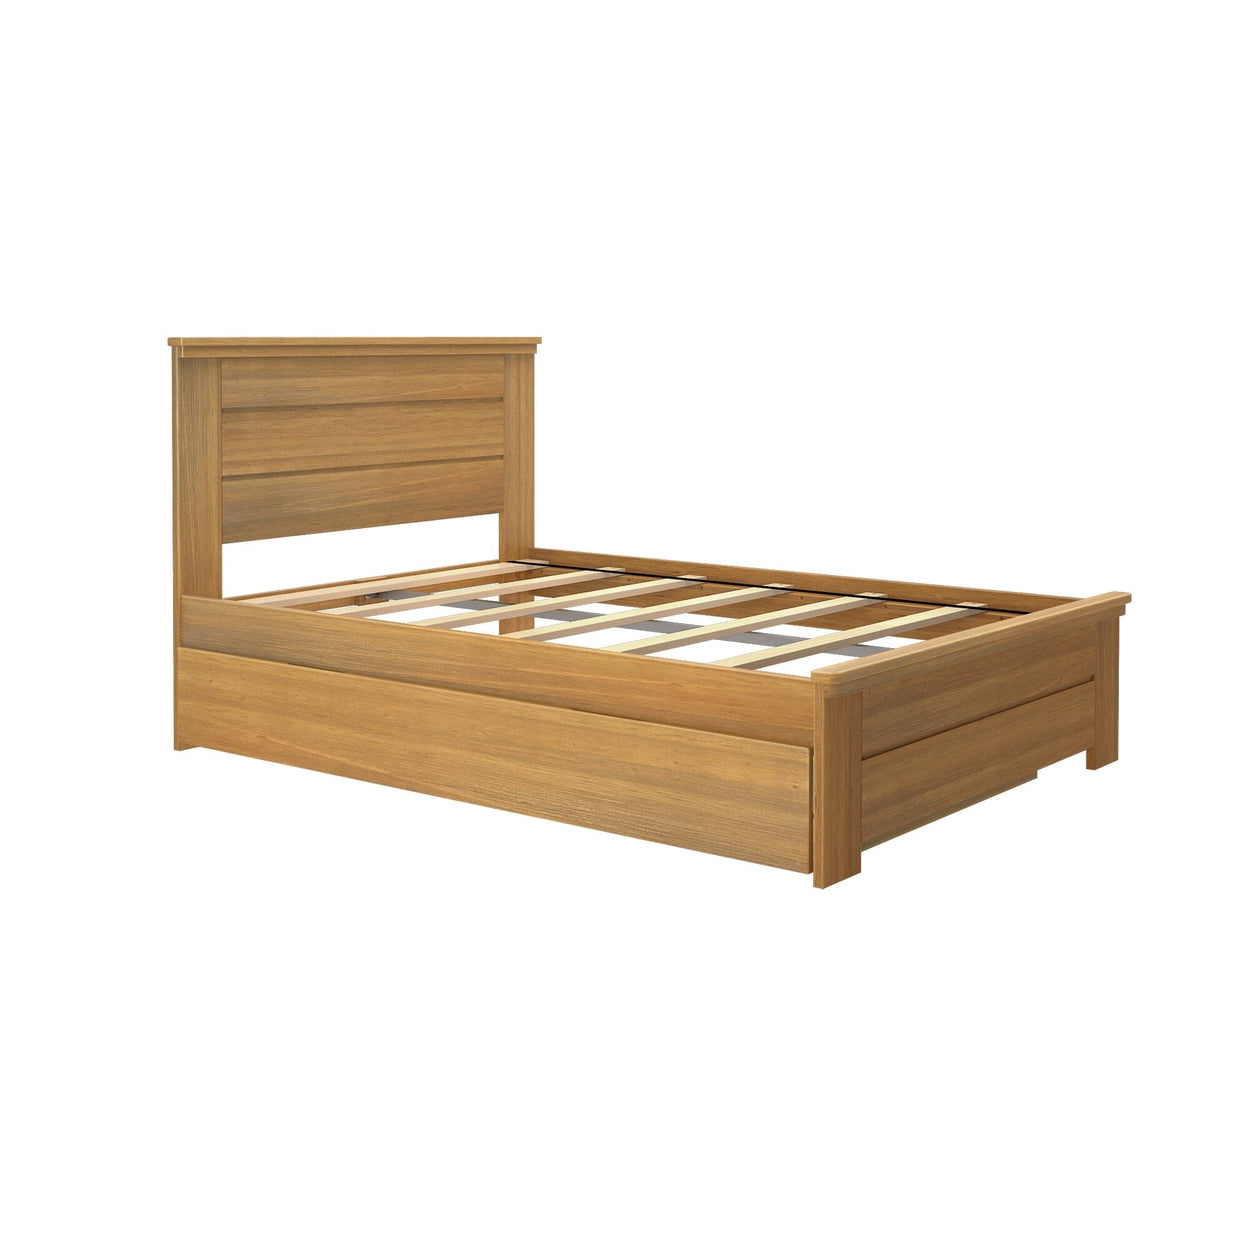 196221-187 : Kids Beds Farmhouse Full Bed with Panel Headboard with Trundle, Pecan